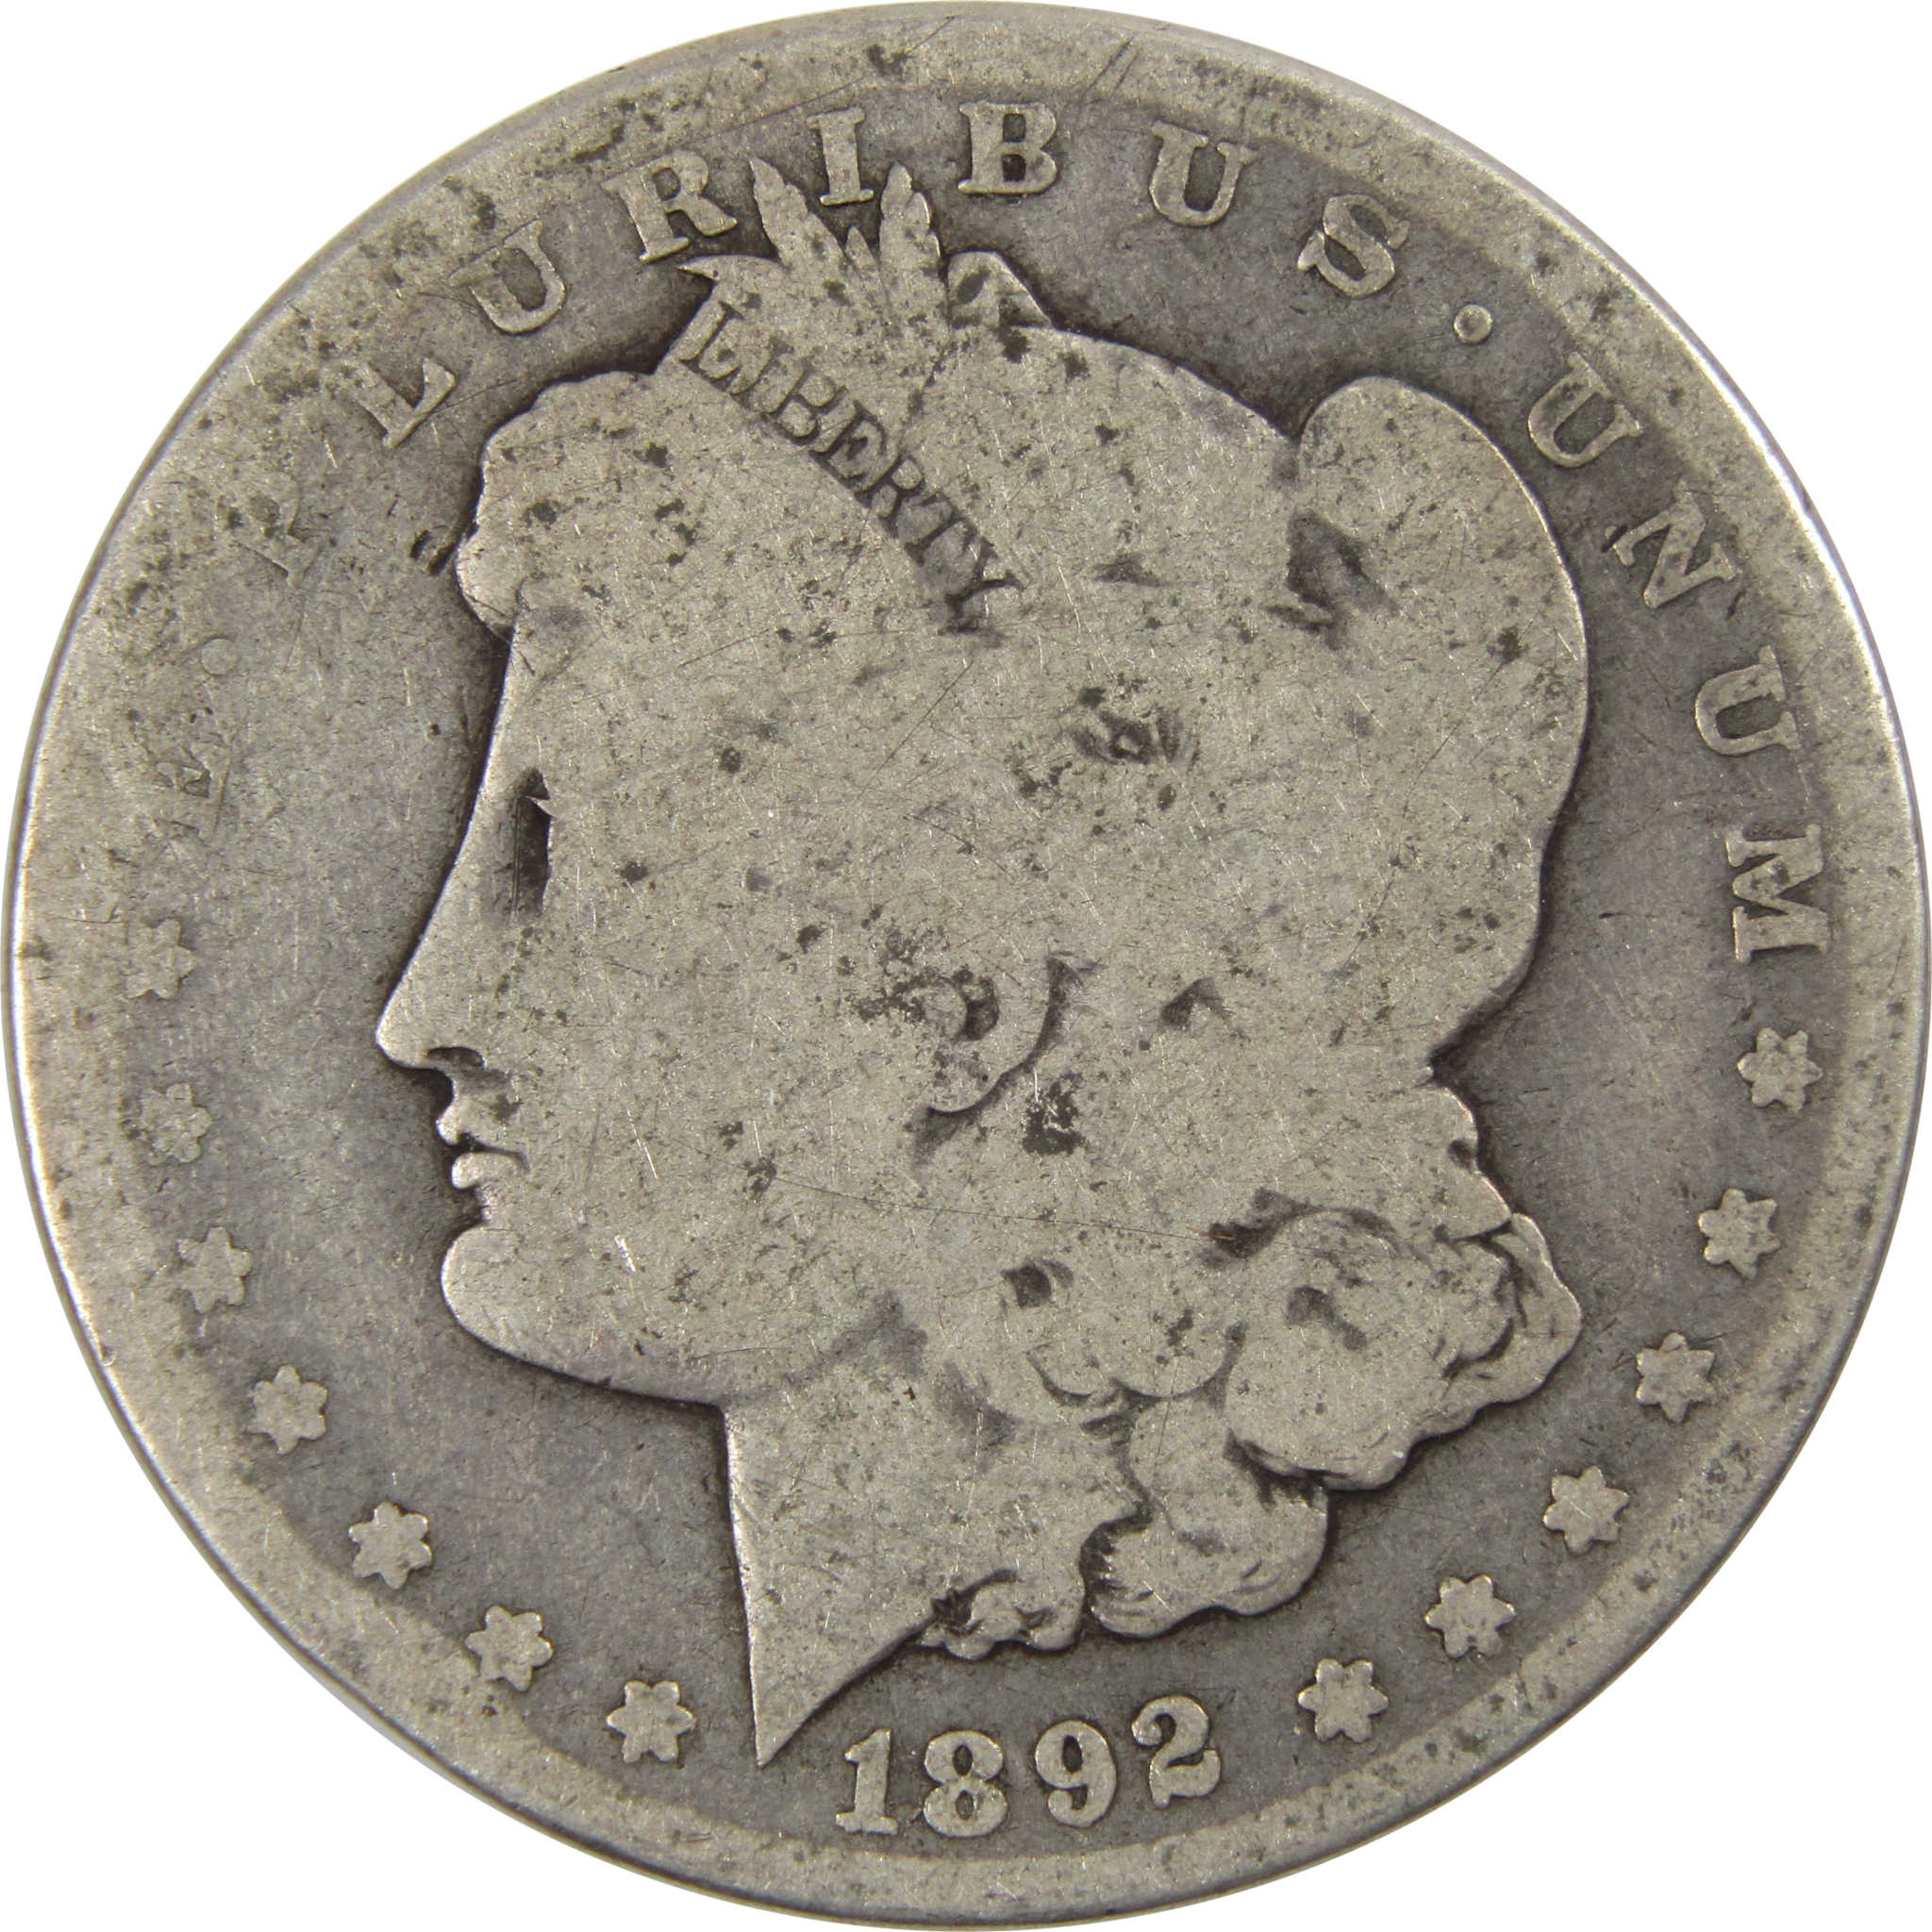 1892 S Morgan Dollar AG About Good 90% Silver $1 Coin SKU:I8344 - Morgan coin - Morgan silver dollar - Morgan silver dollar for sale - Profile Coins &amp; Collectibles